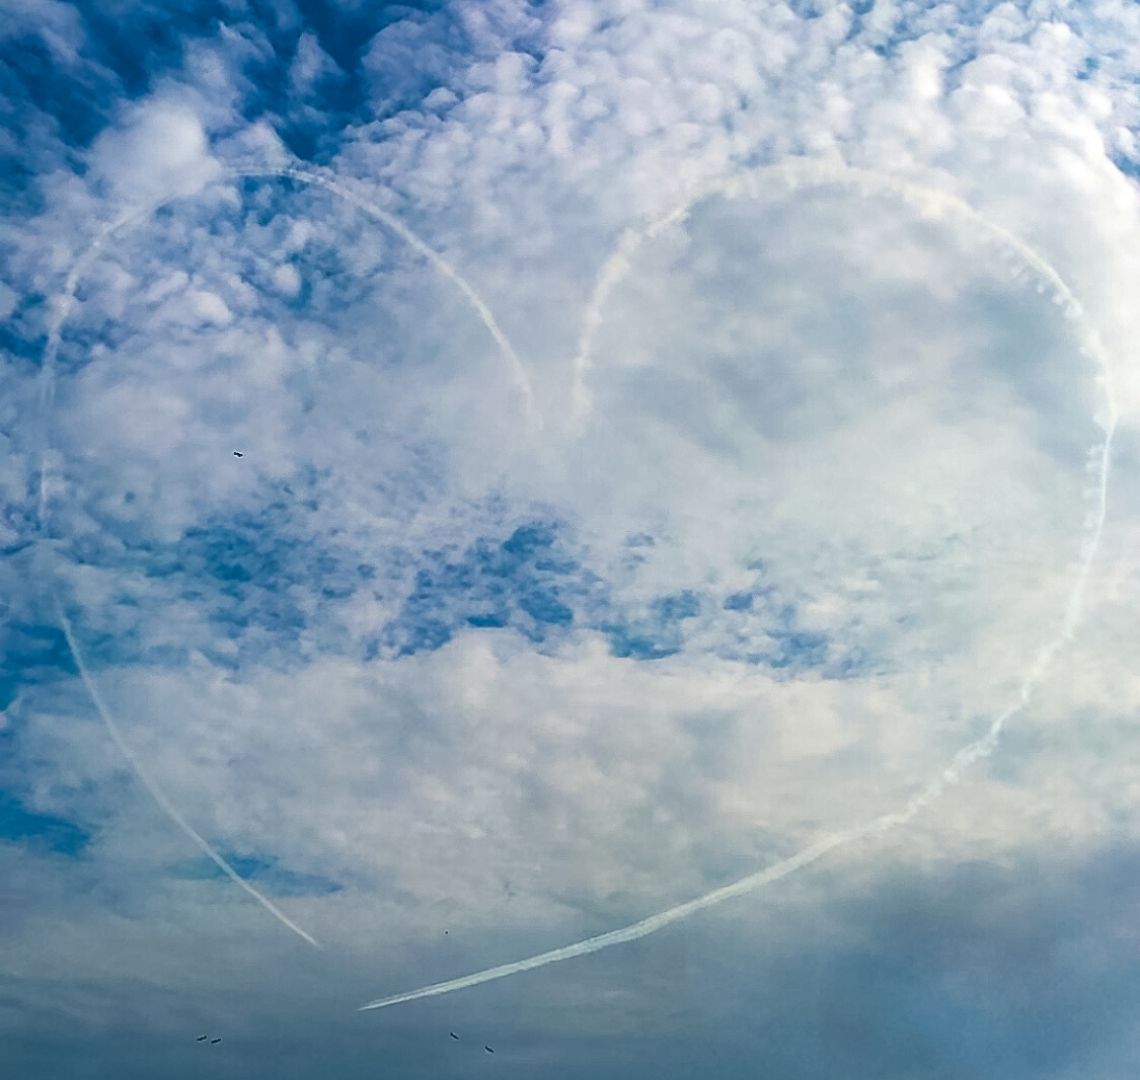 It Takes A Tribe - the sky is blue with lots of clouds. 2 red arrows planes have drawn a heart in white smoke trails